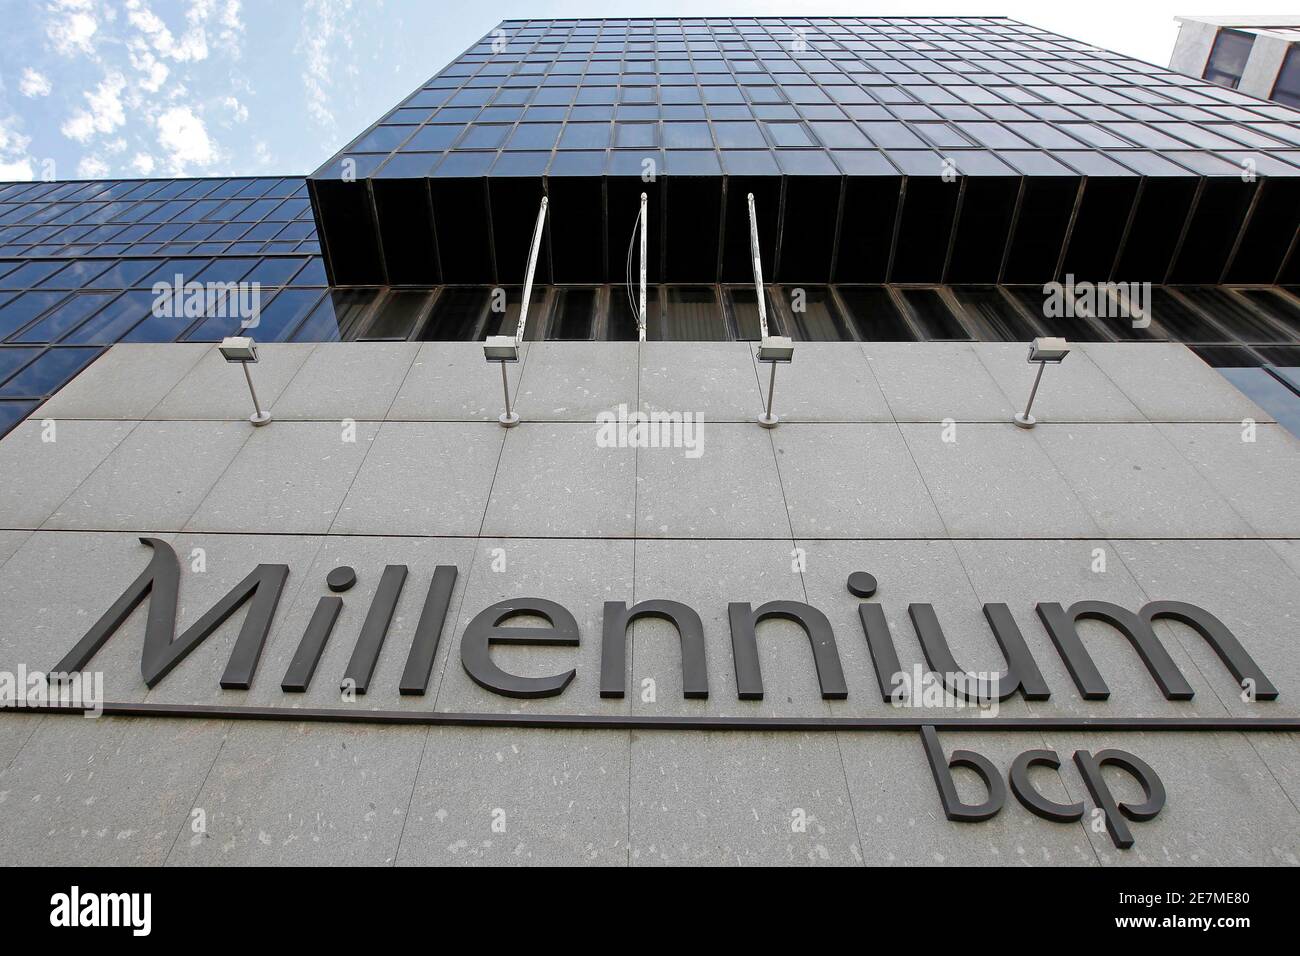 Millennium Bcp High Resolution Stock Photography and Images - Alamy